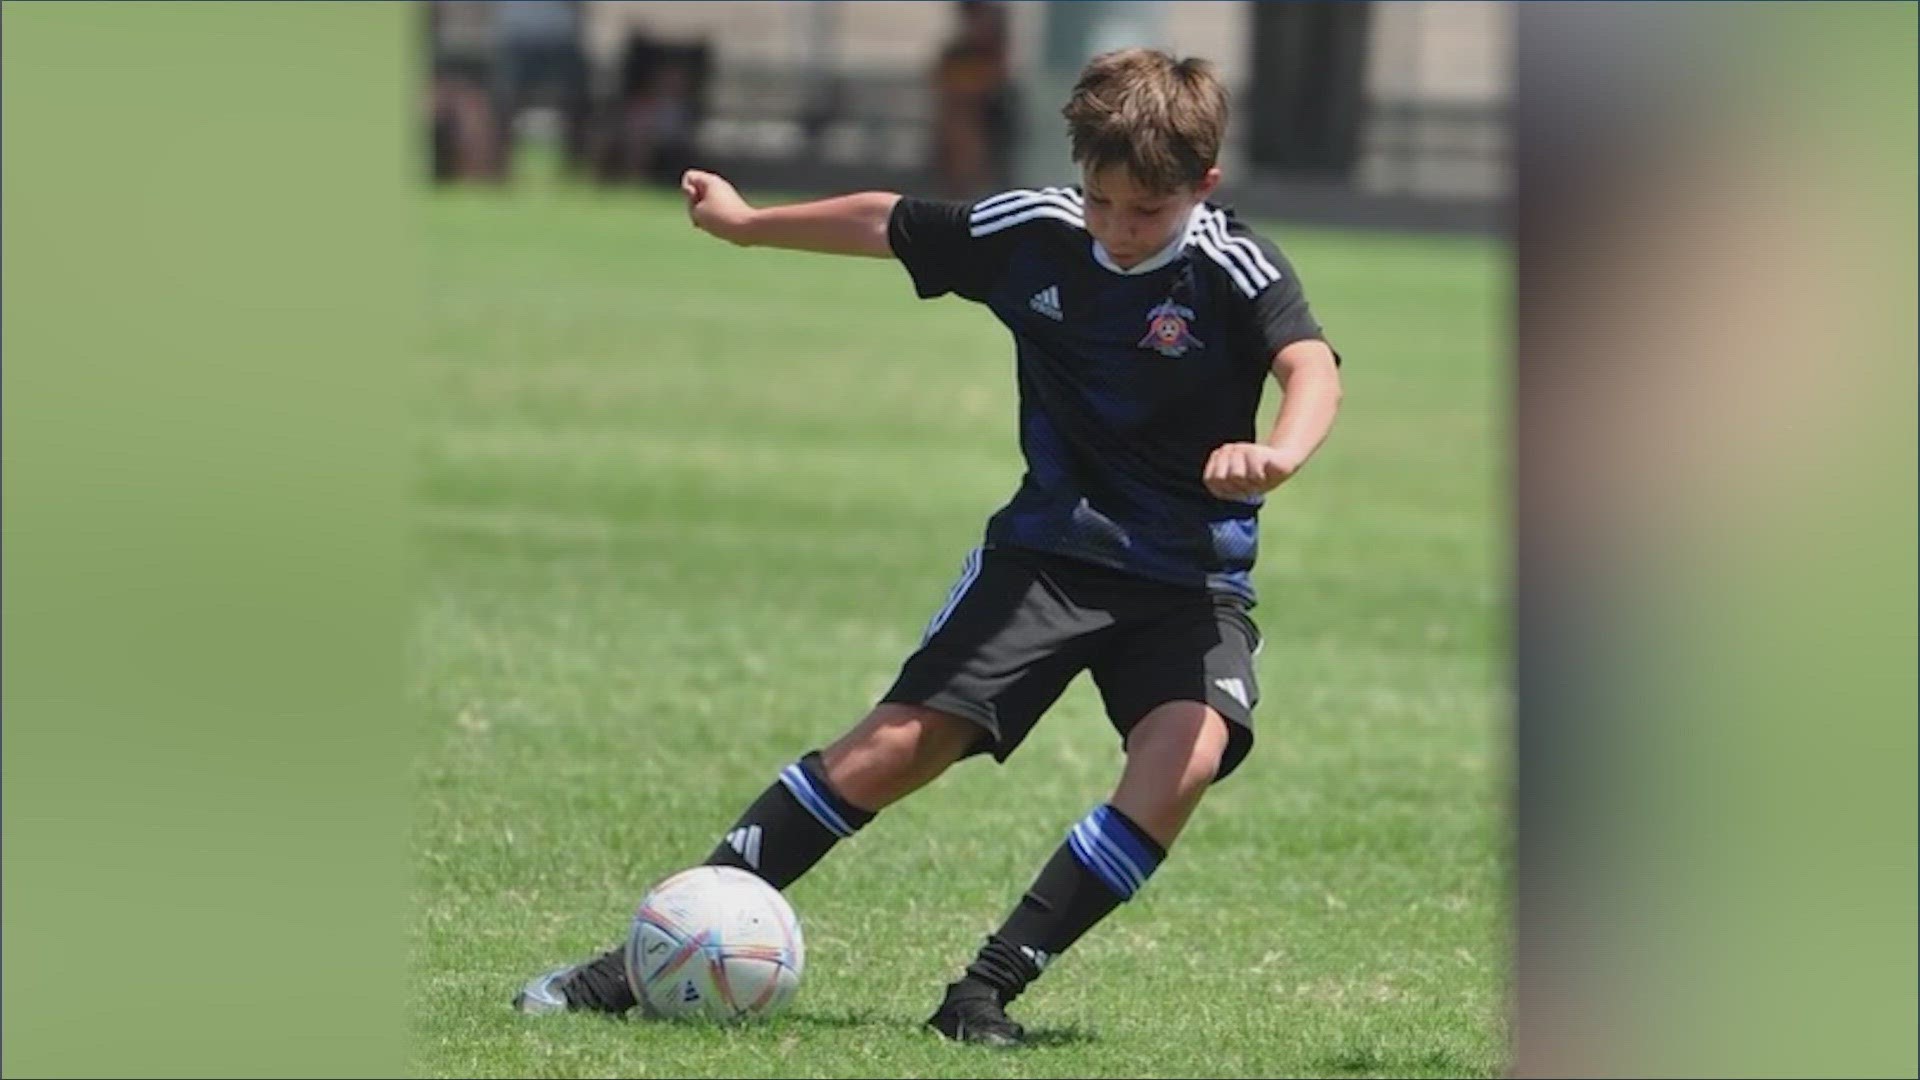 Julio Oliveira, 13, was known for his love of soccer and compassion.